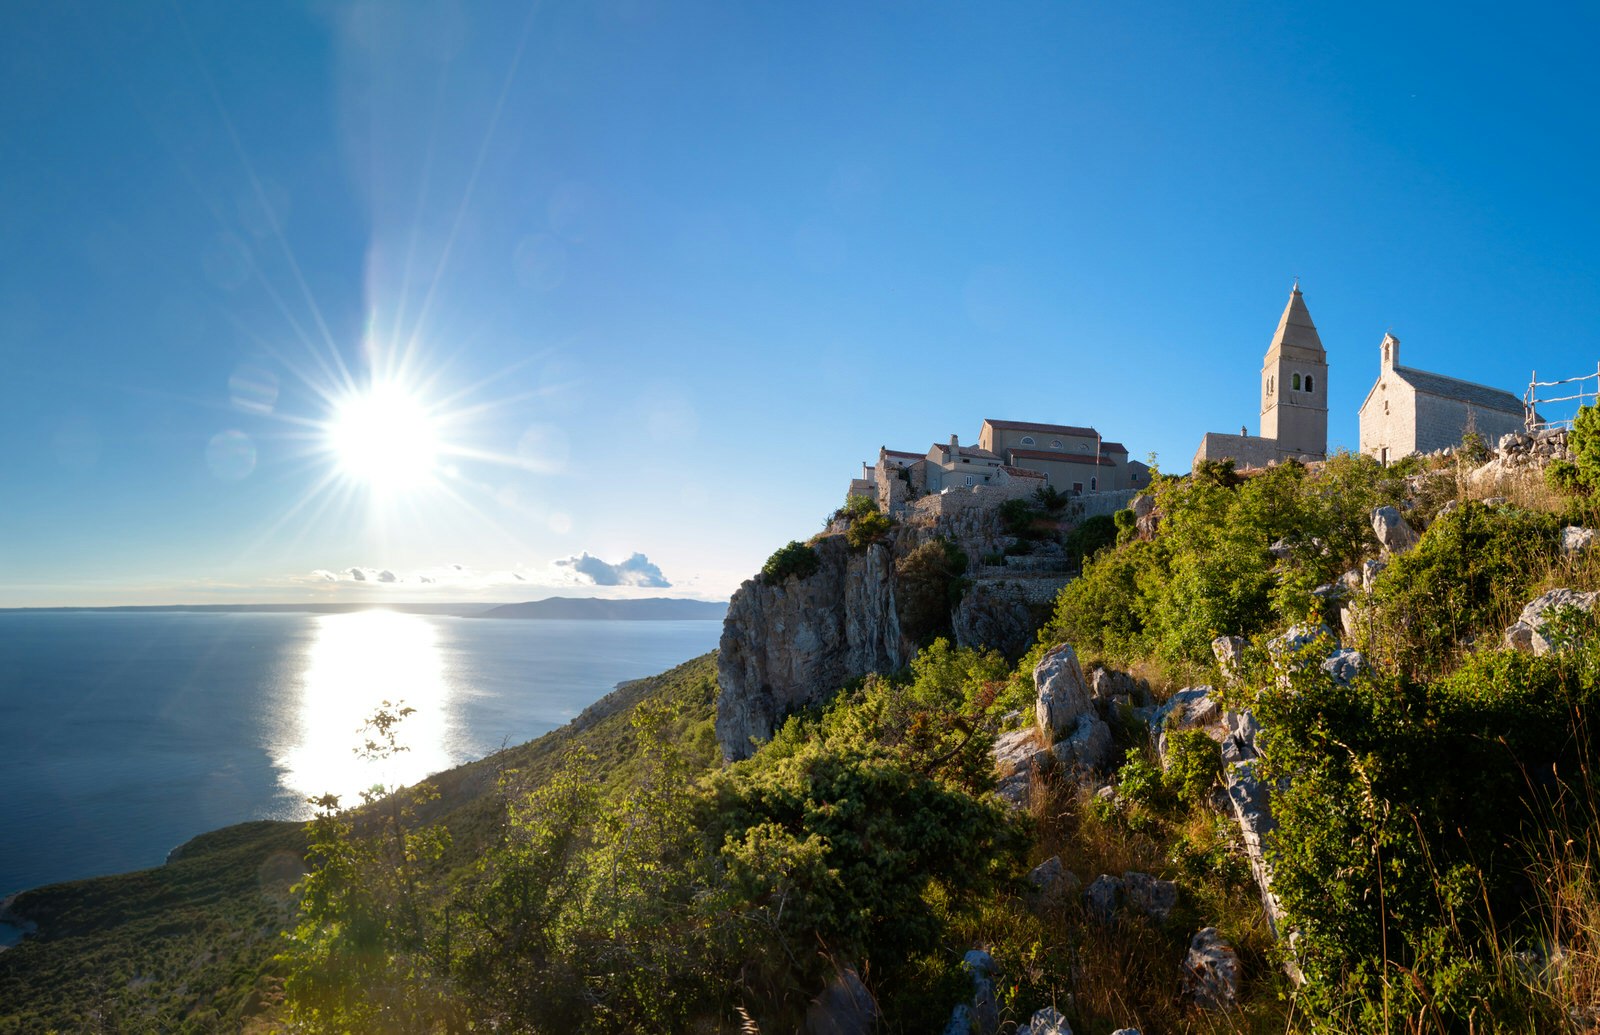 The sun shining low in the sky over the ancient town of Lubenice on the cliff side of Cres Island